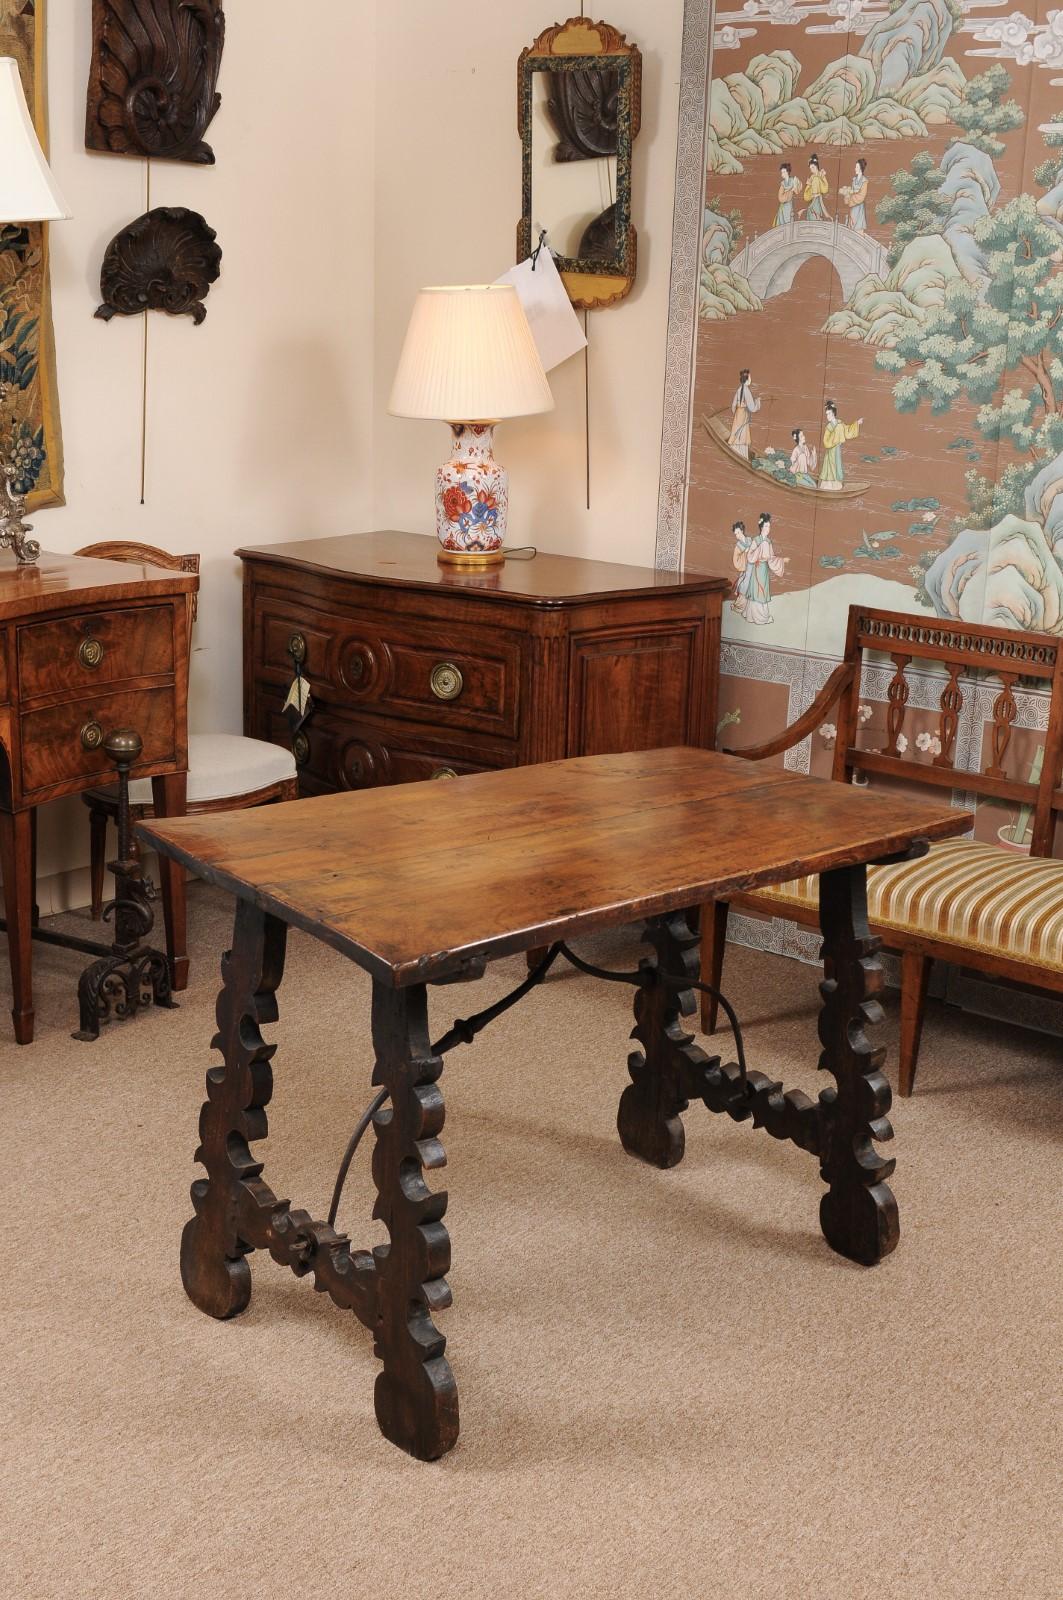 18th Century Continental Walnut table with Lyre-Form Legs & Iron stretcher.